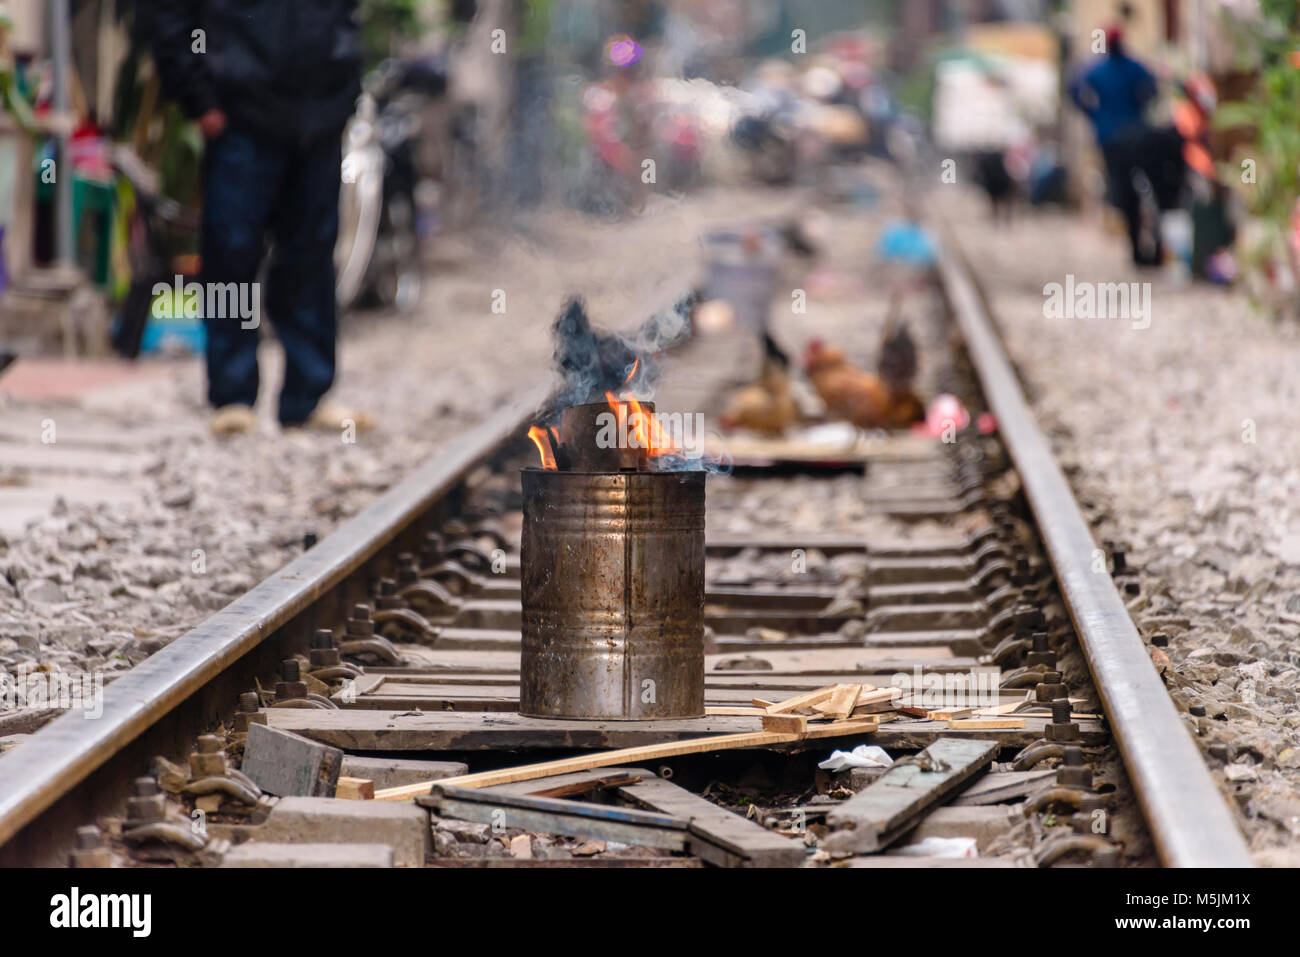 A meal is cooked in a metal stove in the middle of railway tracks with chickens in the background at 'Railway Street' in Hanoi, Vietnam. Stock Photo